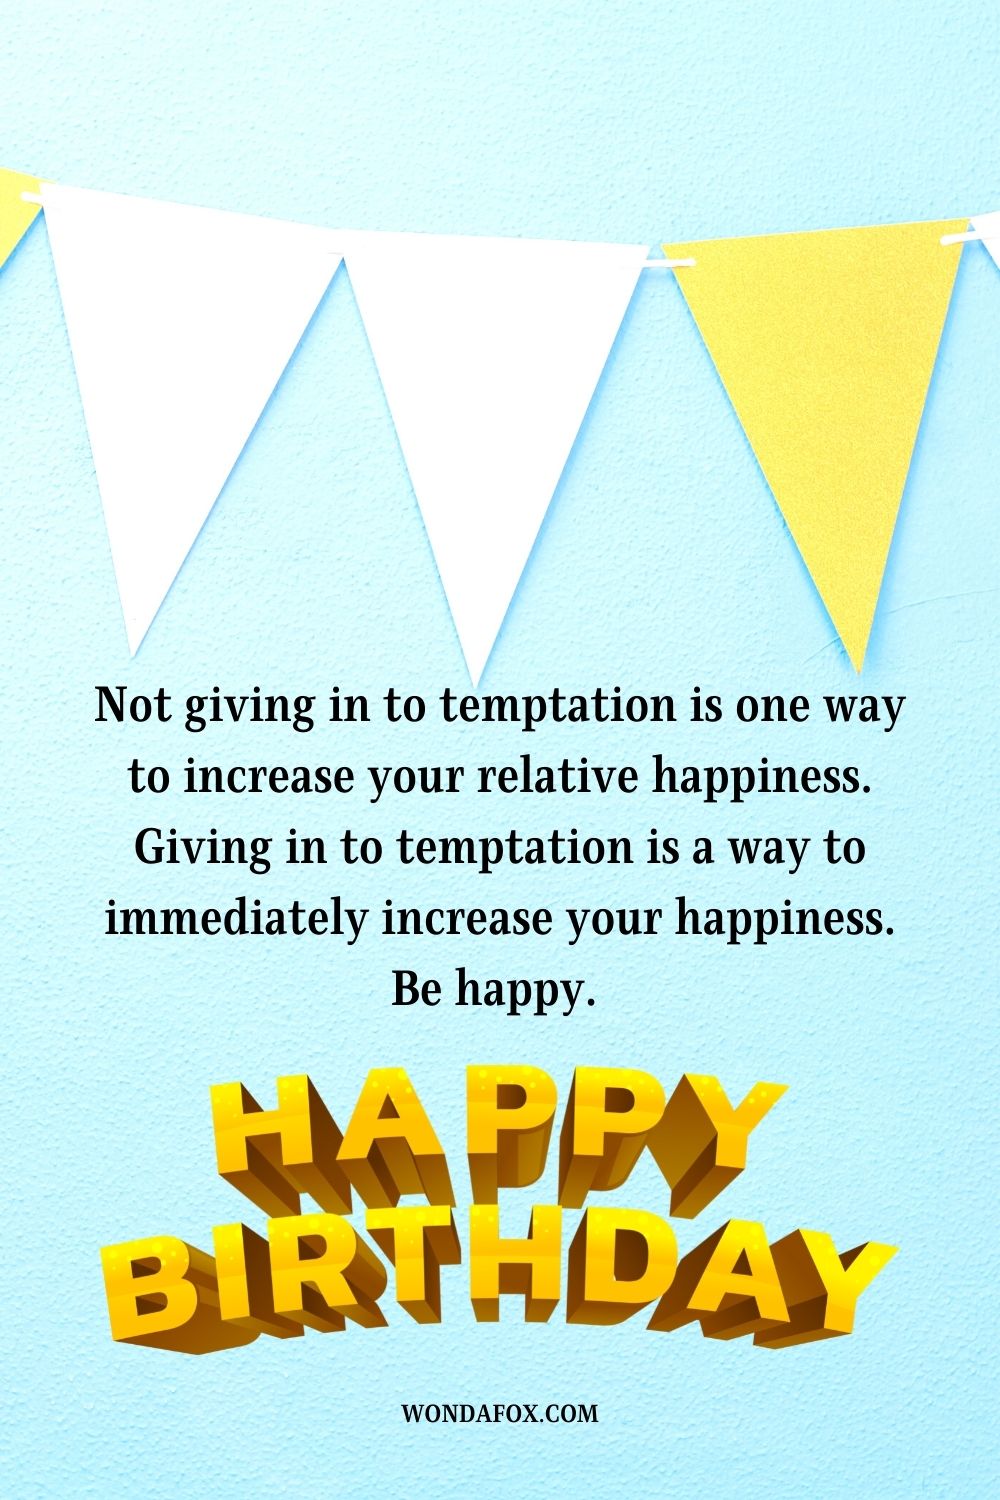 Not giving in to temptation is one way to increase your relative happiness. Giving in to temptation is a way to immediately increase your happiness. Be happy. Happy birthday.